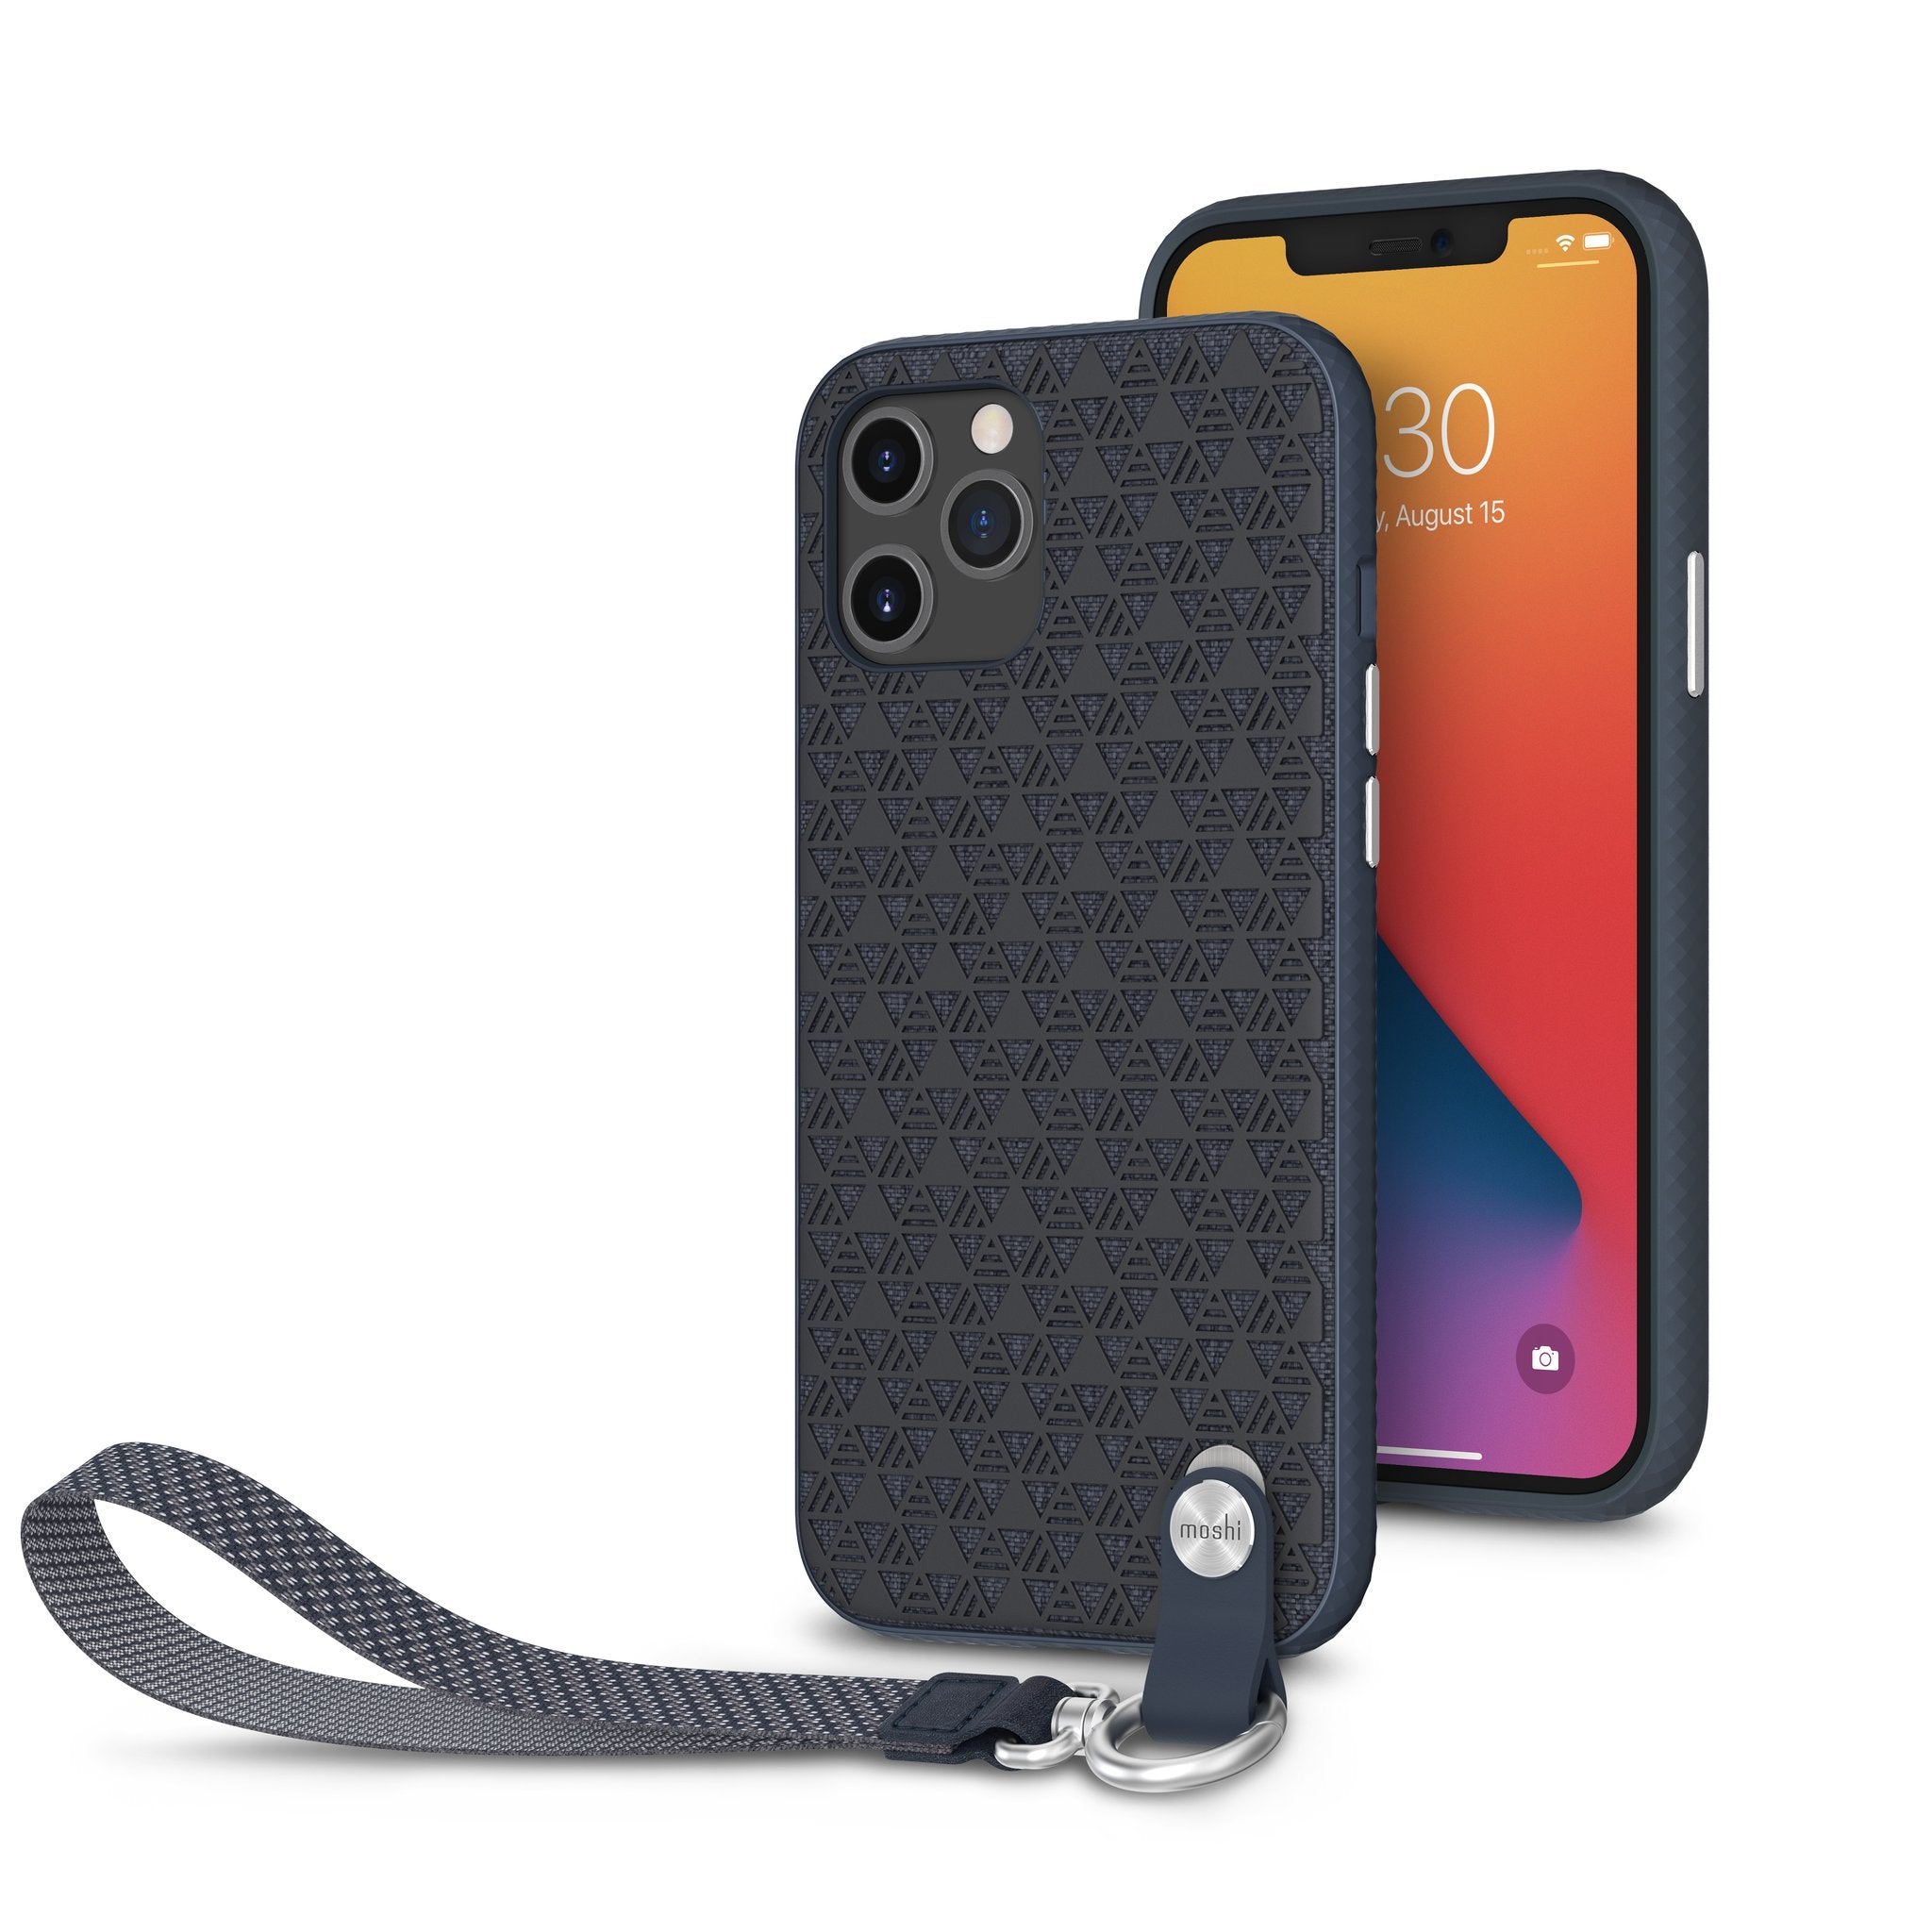 Moshi Altra Case for iPhone 12 Pro Max